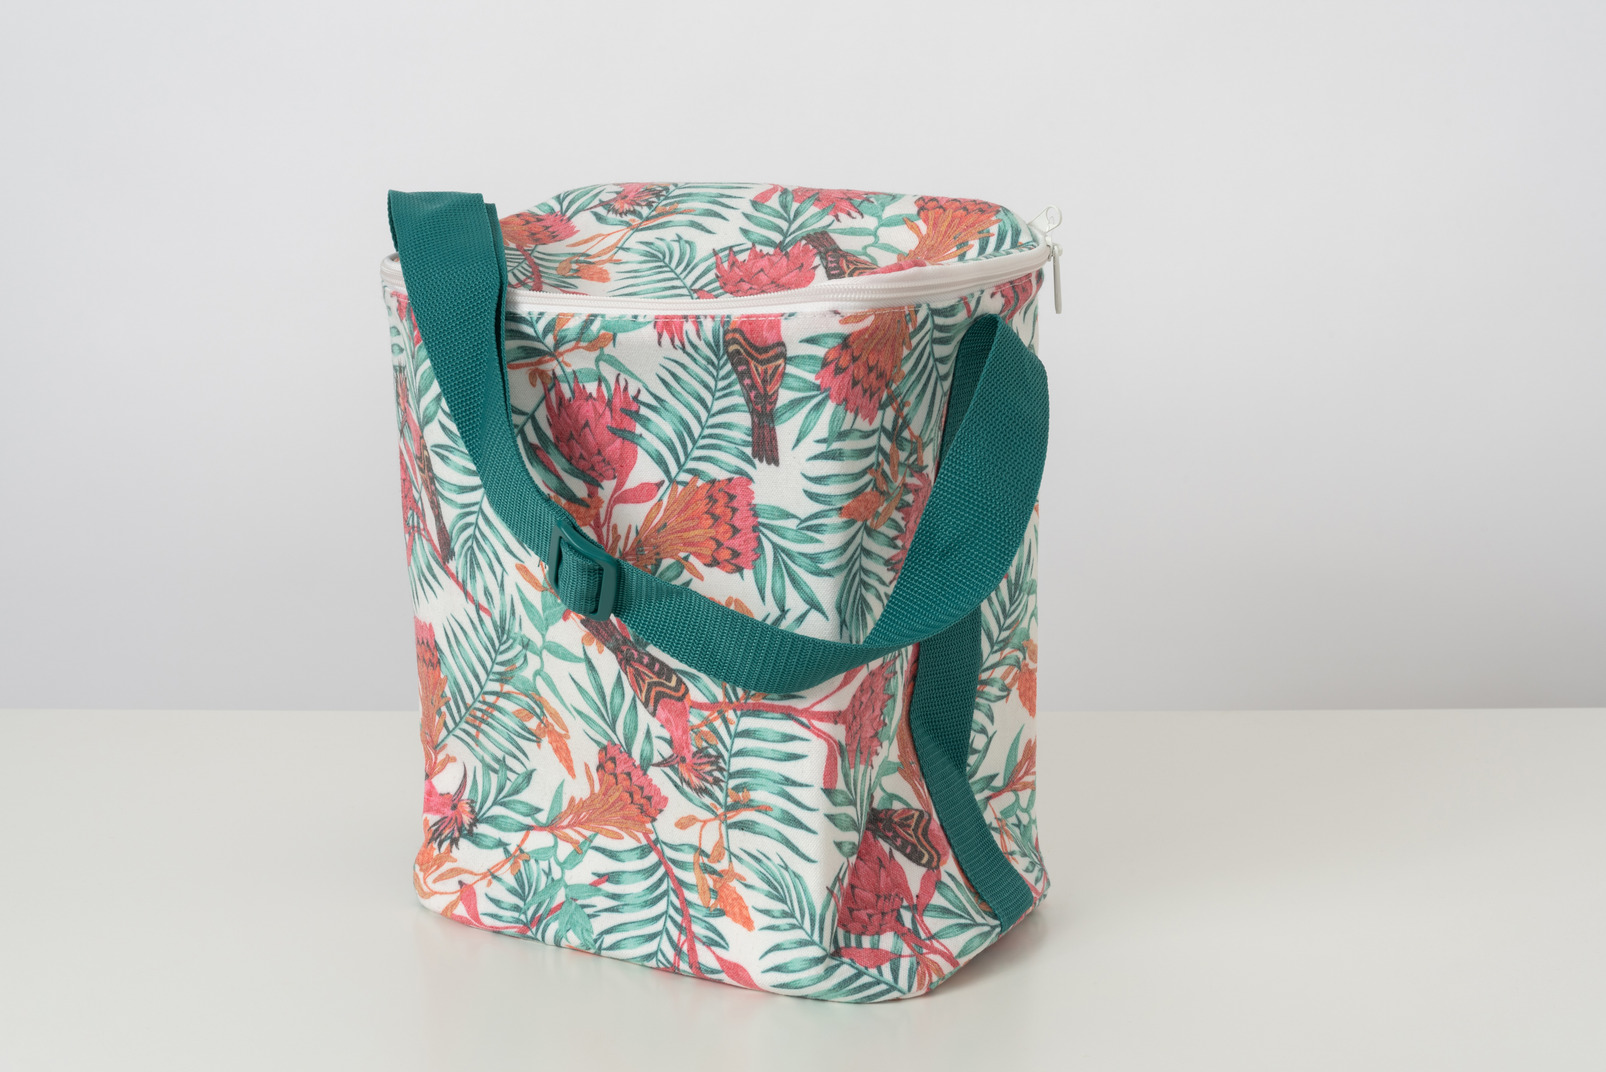 A summer thermal lunch bag with printed plants and butterflies on it